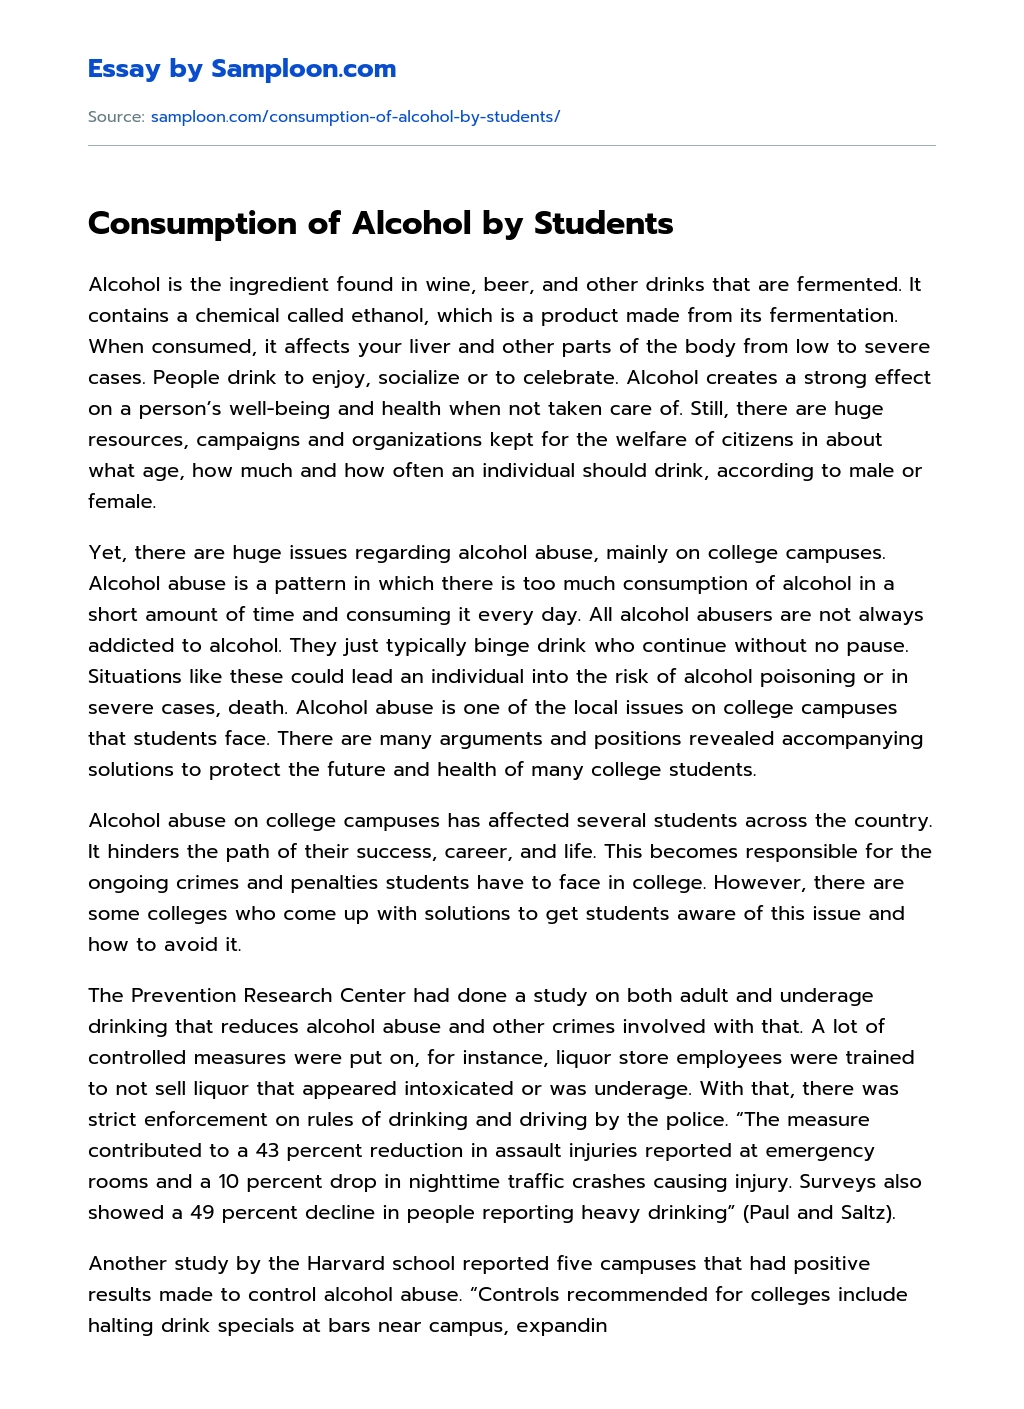 Consumption of Alcohol by Students essay